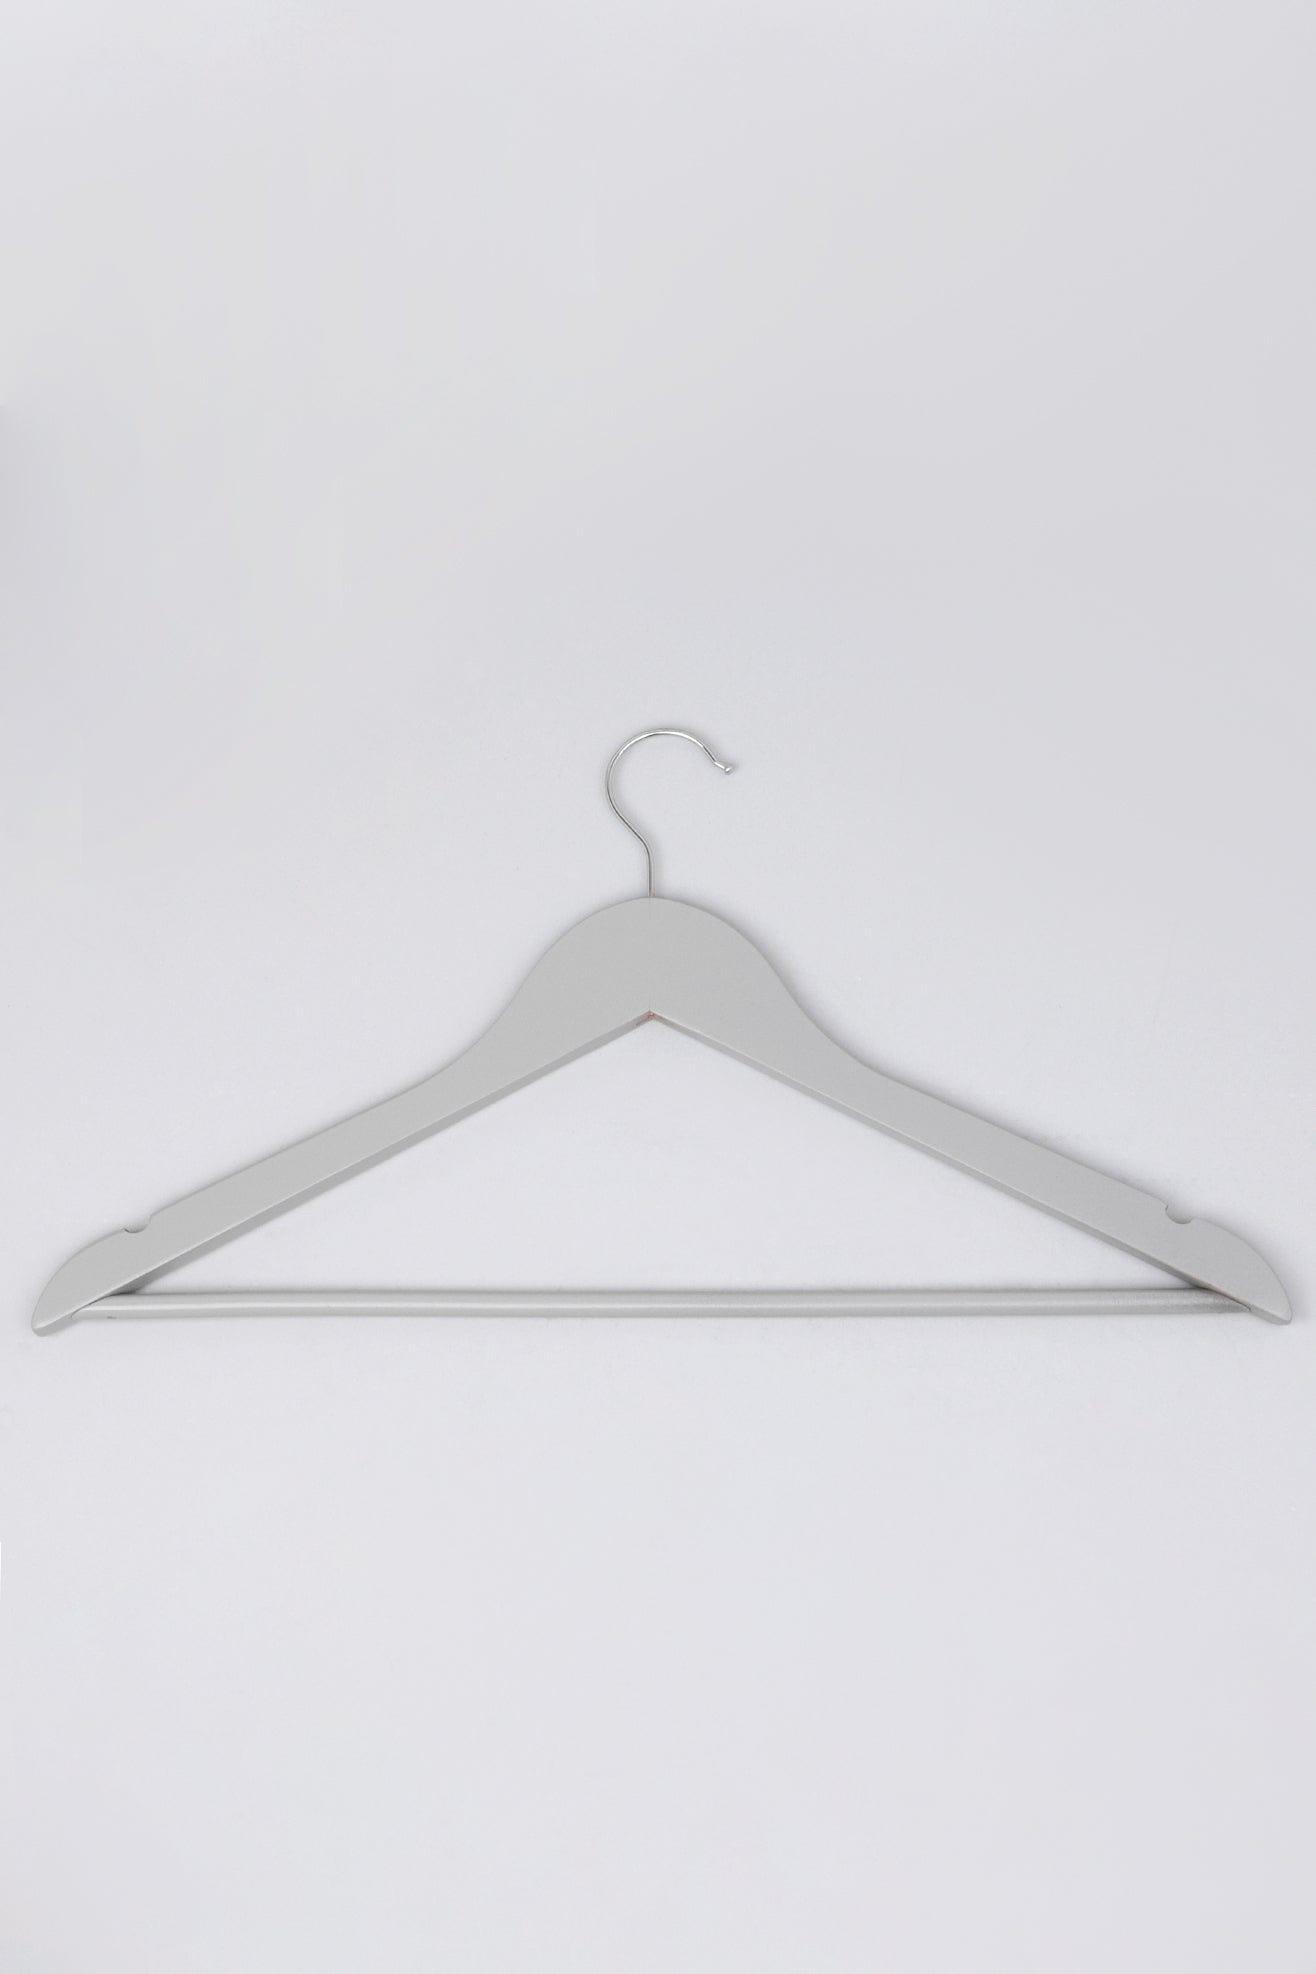 G Decor Hangers Grey Set of 10 Set of 10 Wooden Notched Chrome Hook Clothes Hangers